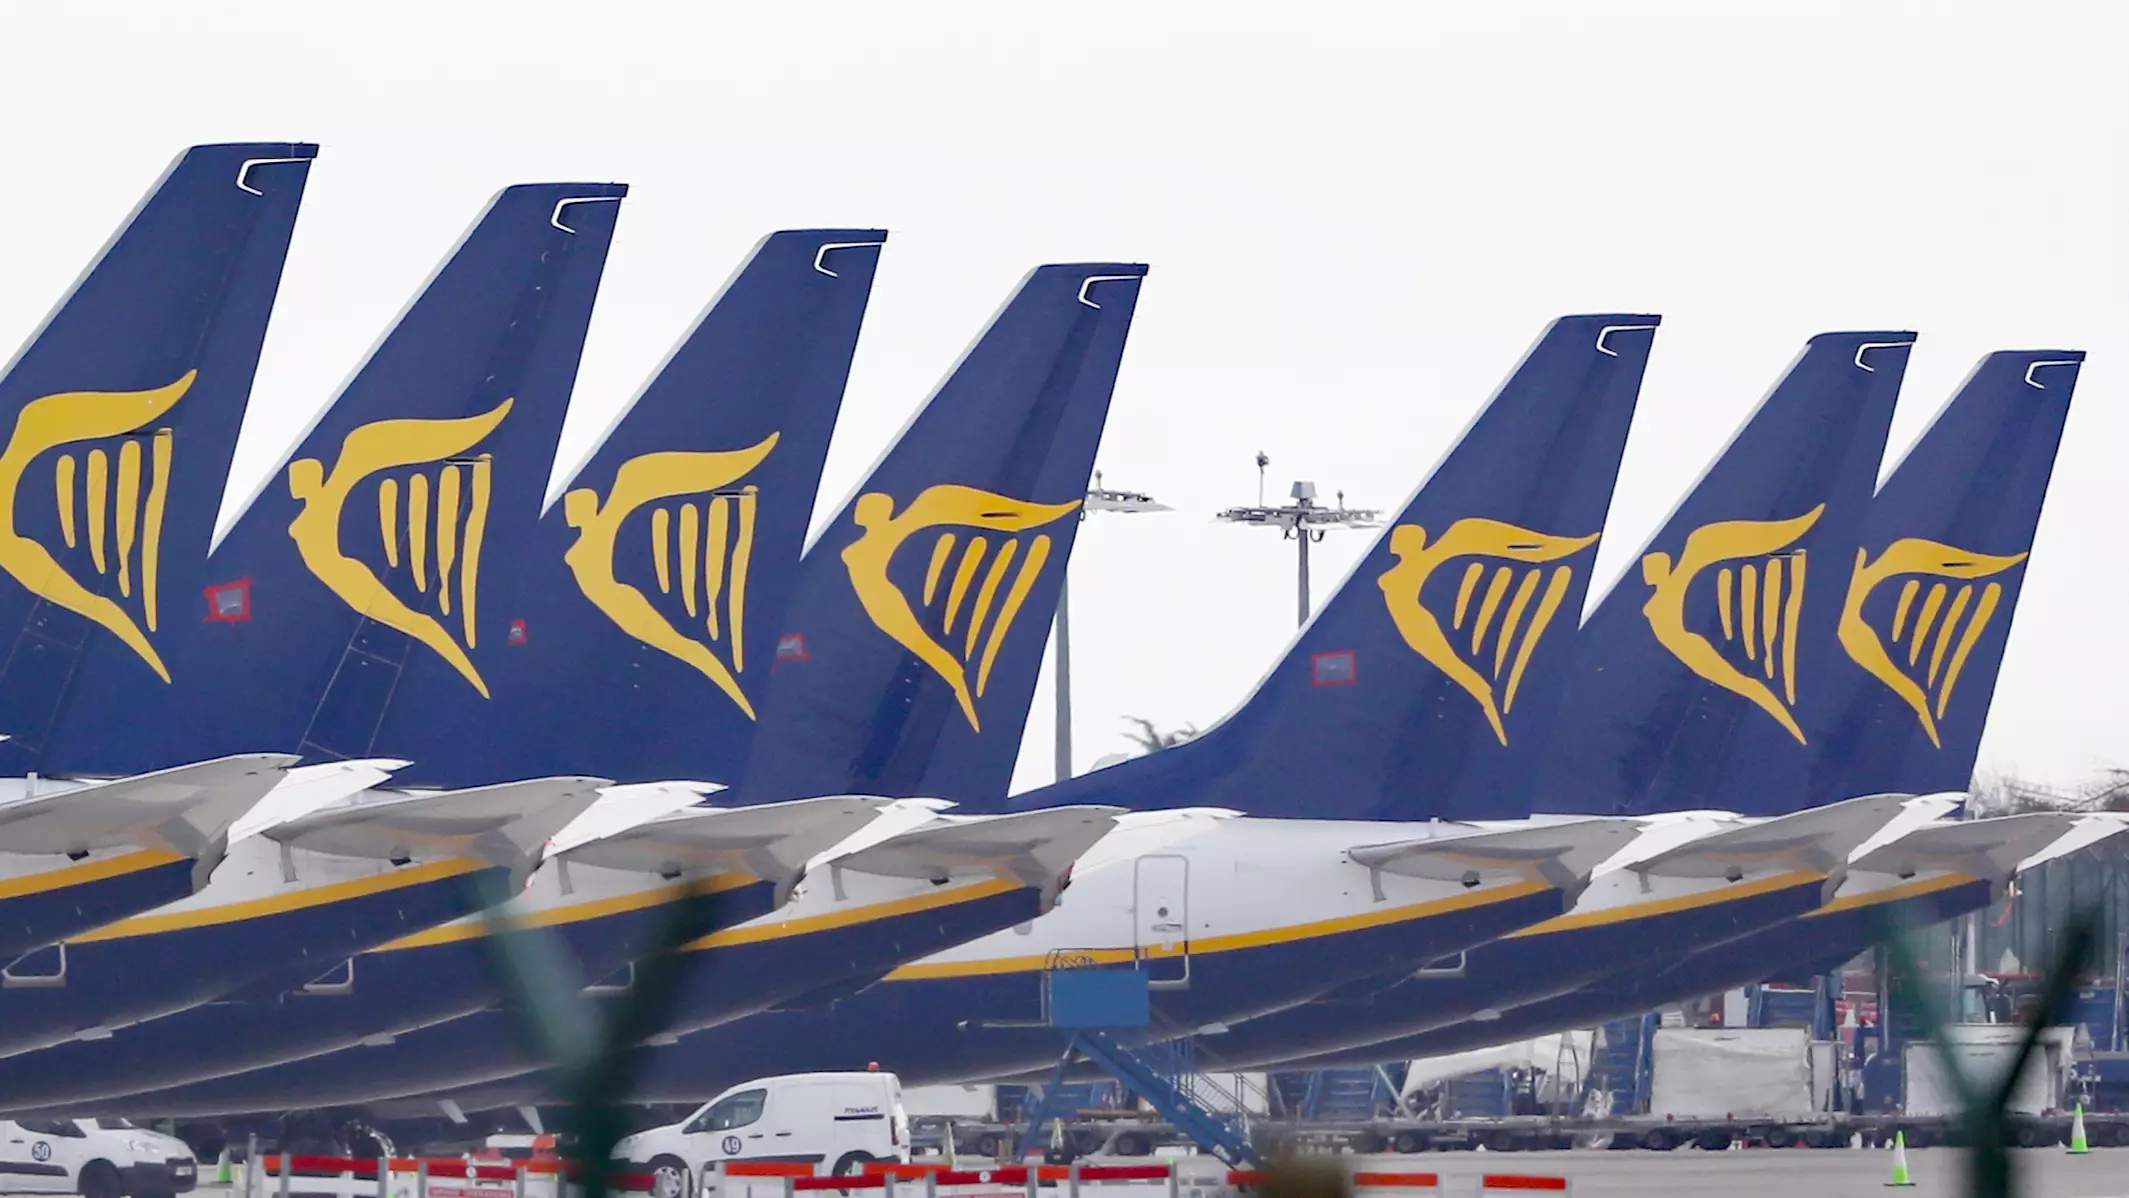 Ryanair's Summer Flash Sale Has Flights For £9.99 To Spain, Italy And Malta